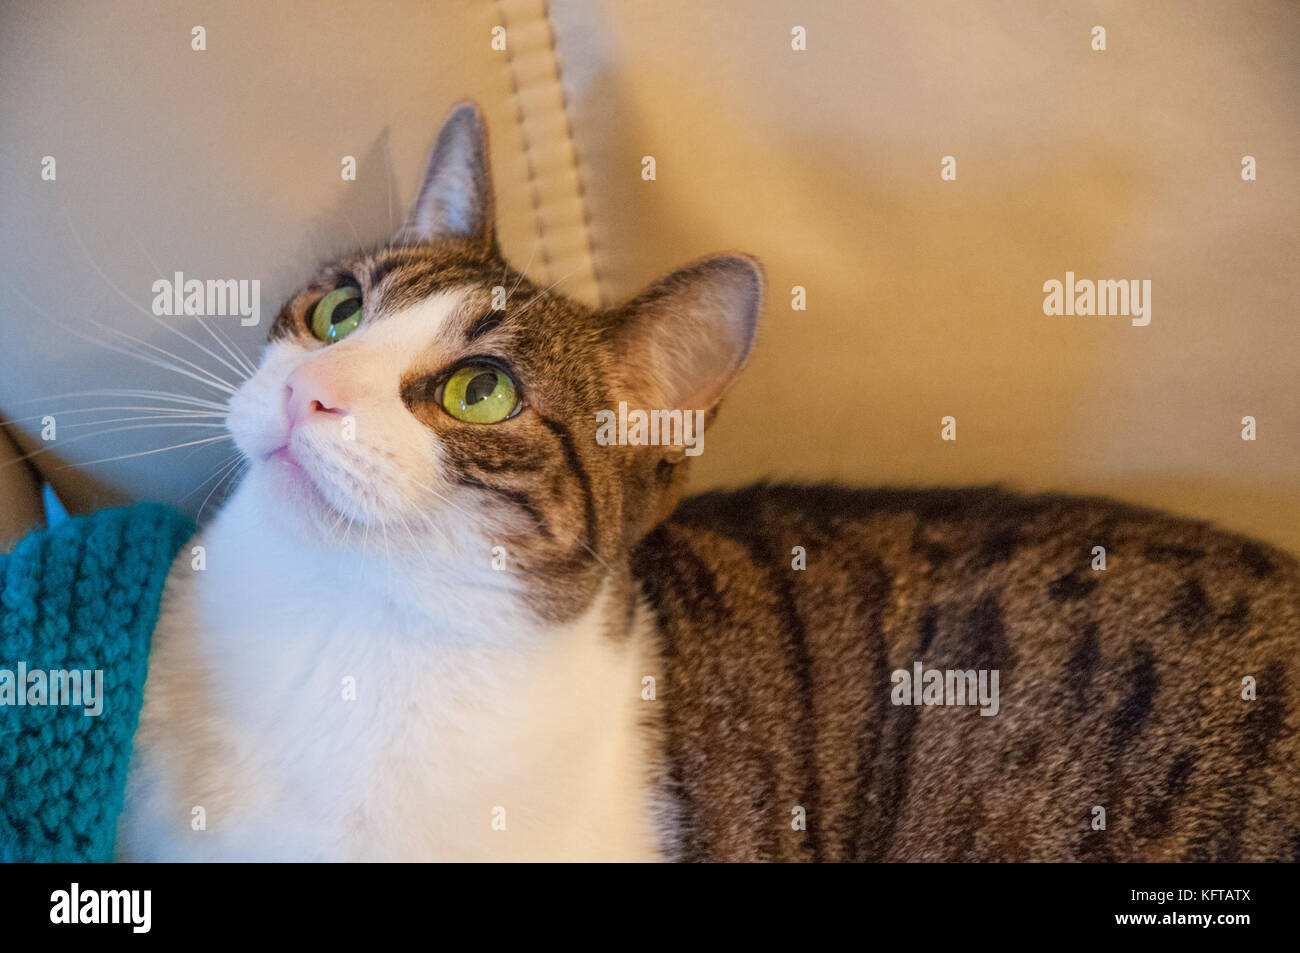 Tabby and white cat lying on armchair, looking up. Stock Photo